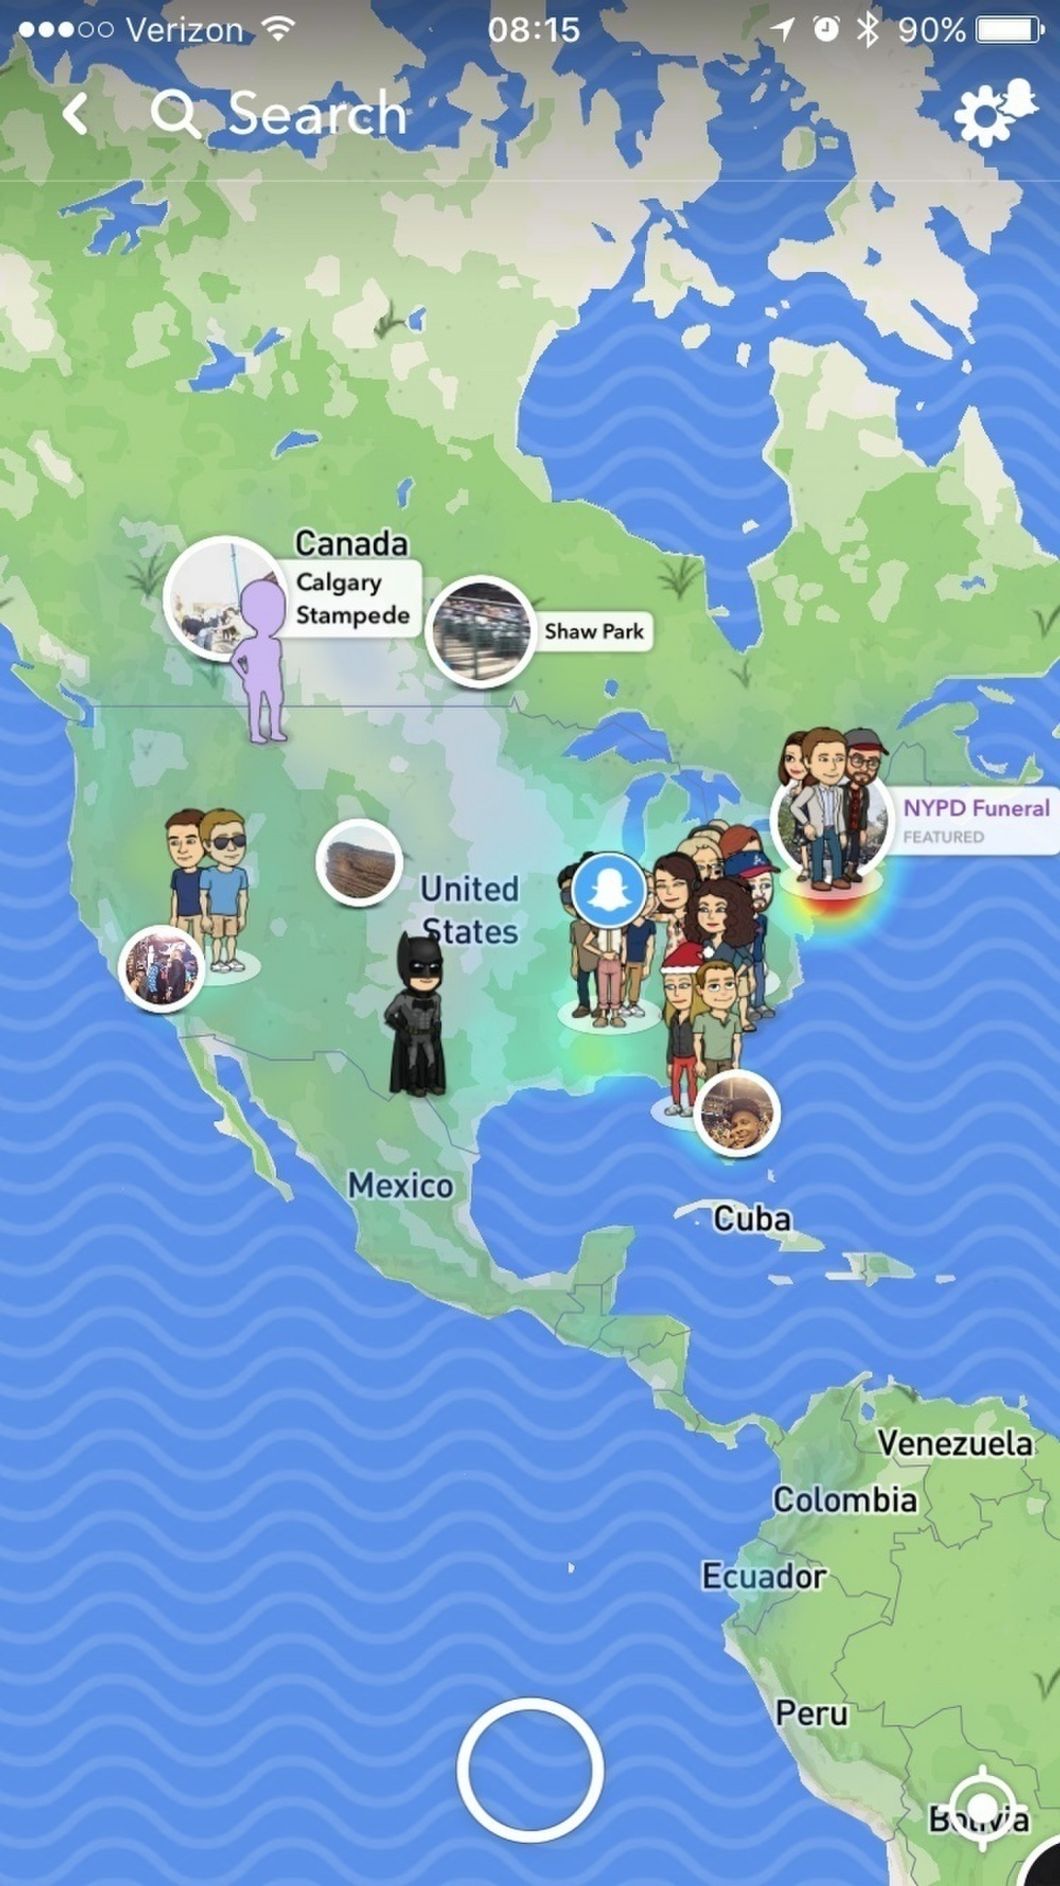 It's Time For Snapchat To Get Rid Of The 'Snap Map'